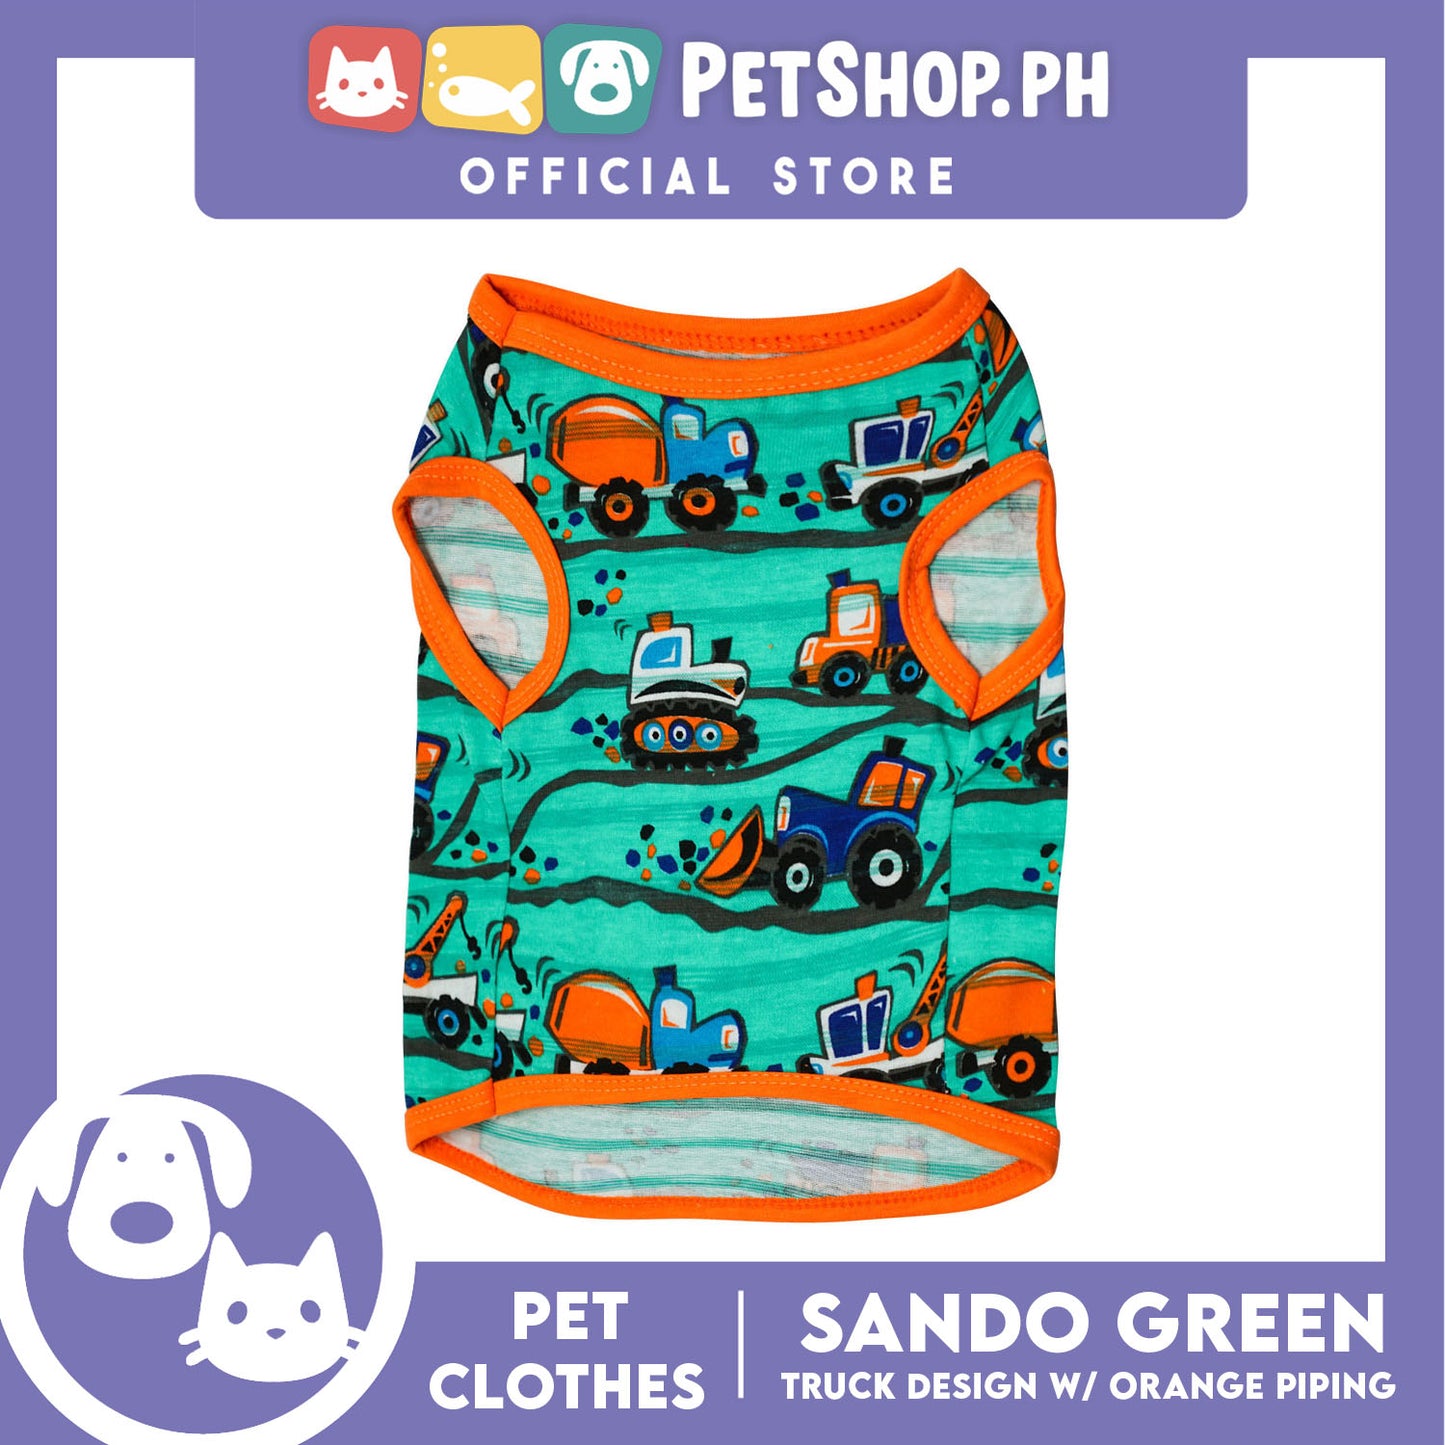 Green Pet Sando with Truck Design with Orange Piping Sleeveless (Extra Large) for Puppy, Small Dogs and Cats